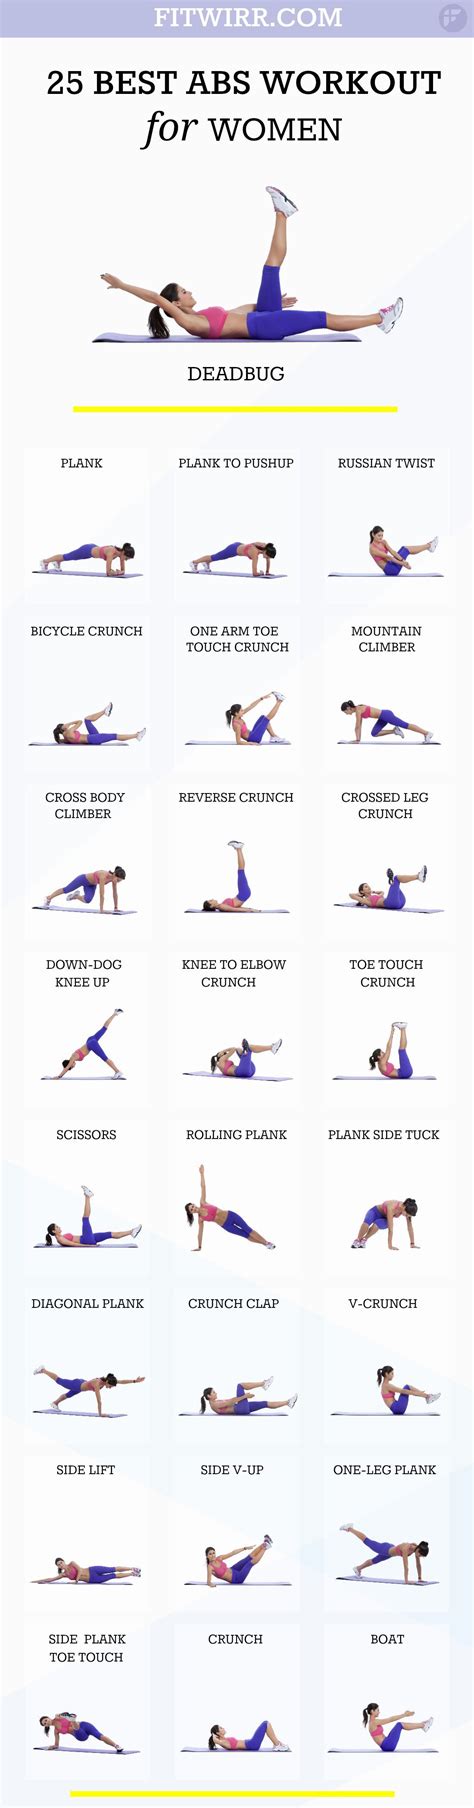 Best Ab Workouts For Women Top Ab Exercises For Exercises Workout Exercises And Workout